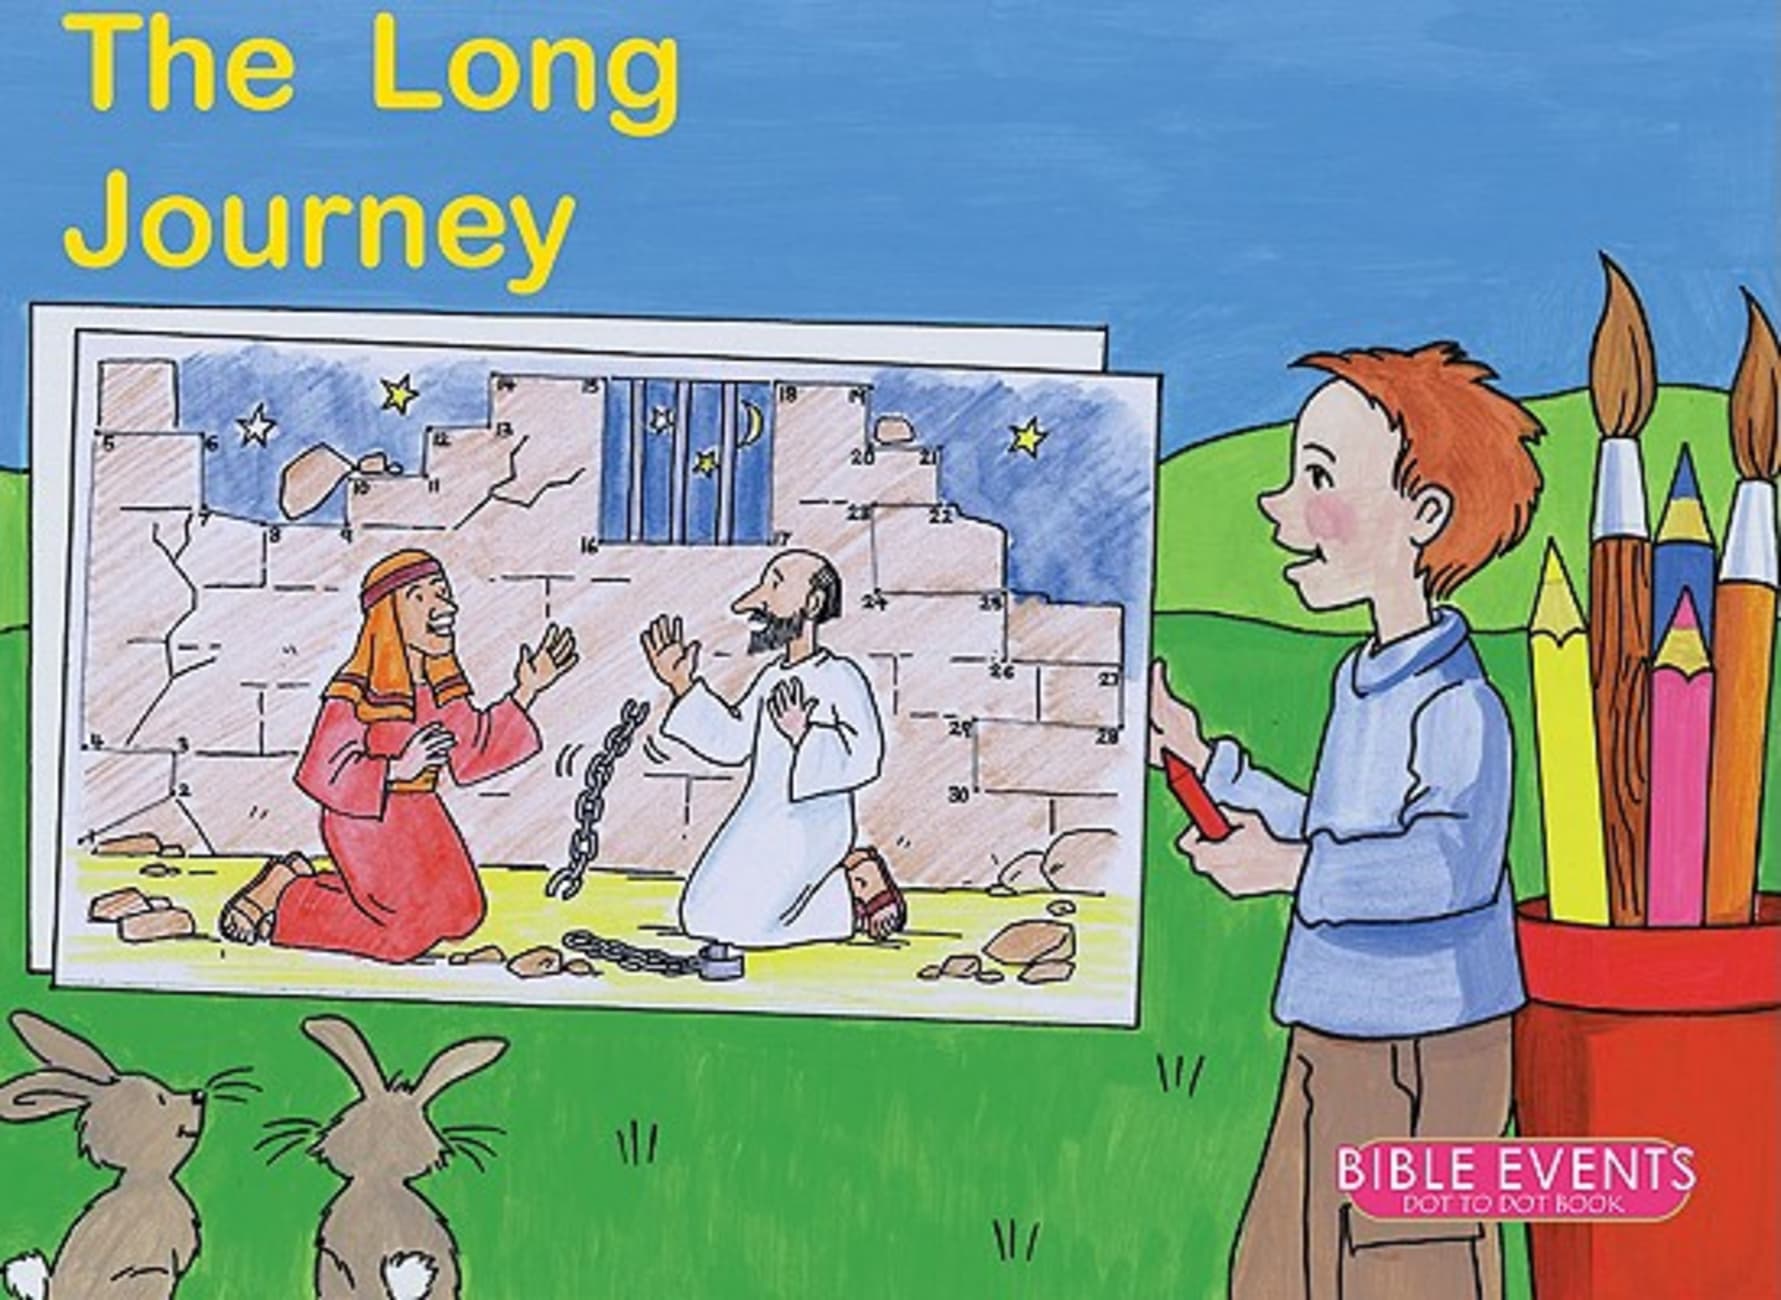 The Long Journey (Bible Events Dot To Dot Series) Paperback